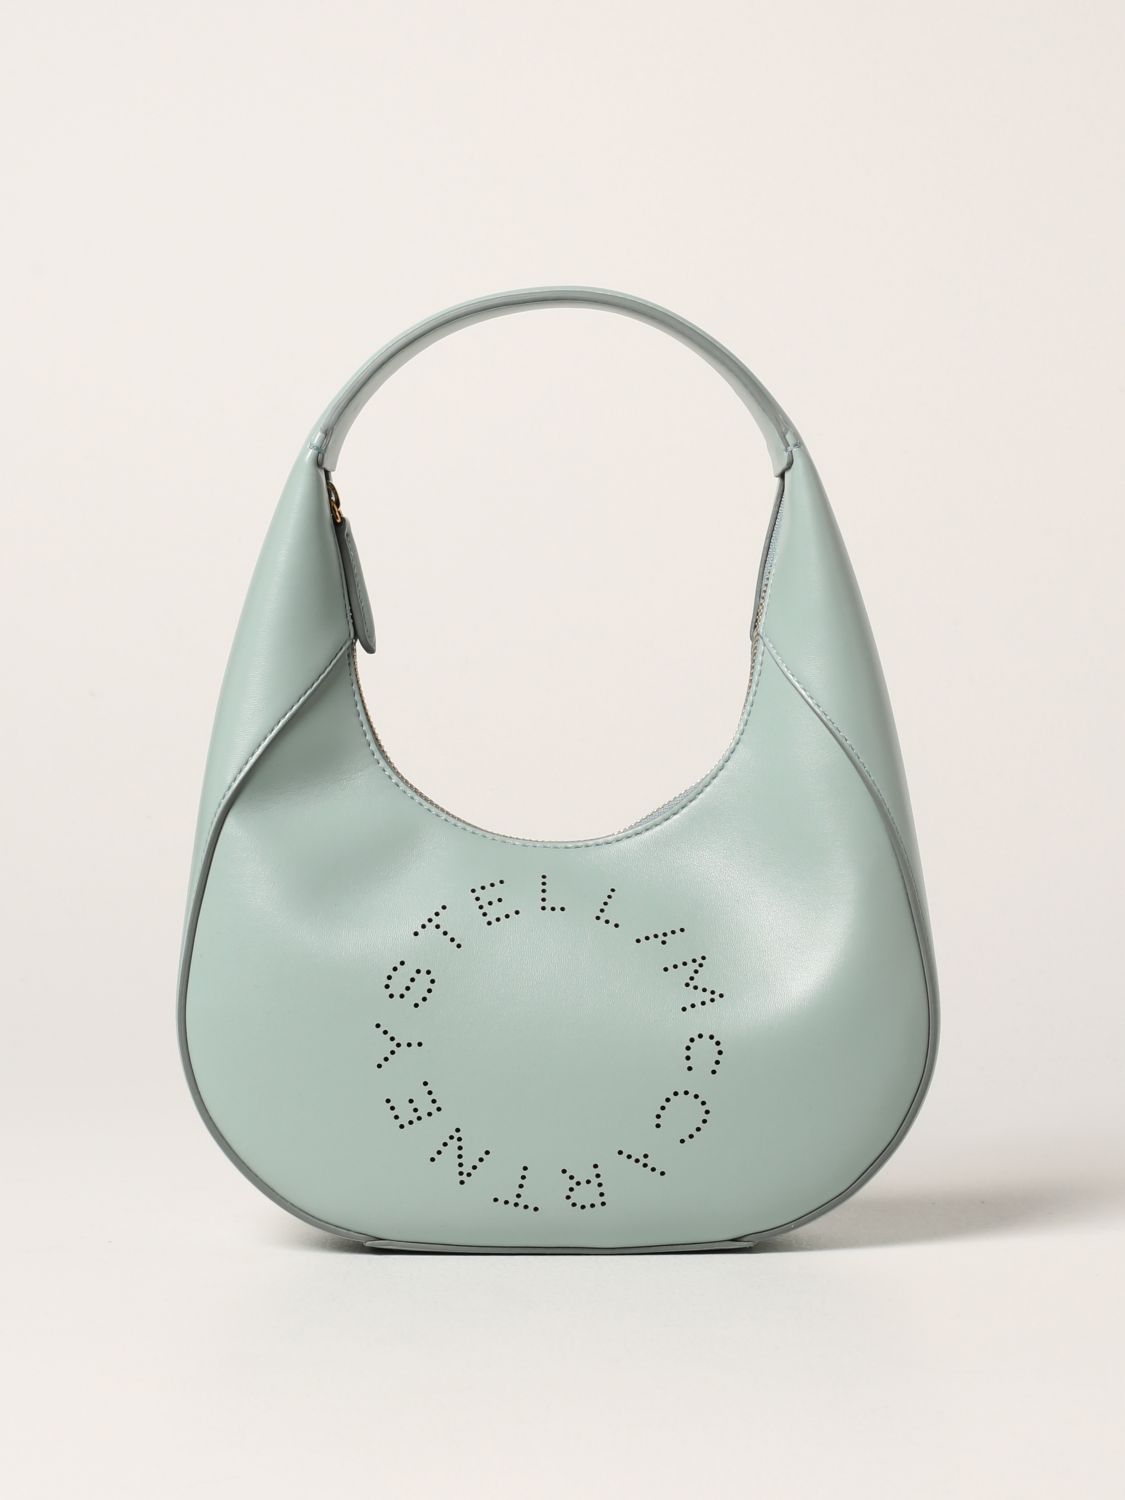 STELLA MCCARTNEY: shoulder bag with perforated logo | Shoulder Bag Stella Mccartney Women Grey | Shoulder Bag Stella Mccartney 700269W8542 GIGLIO.COM